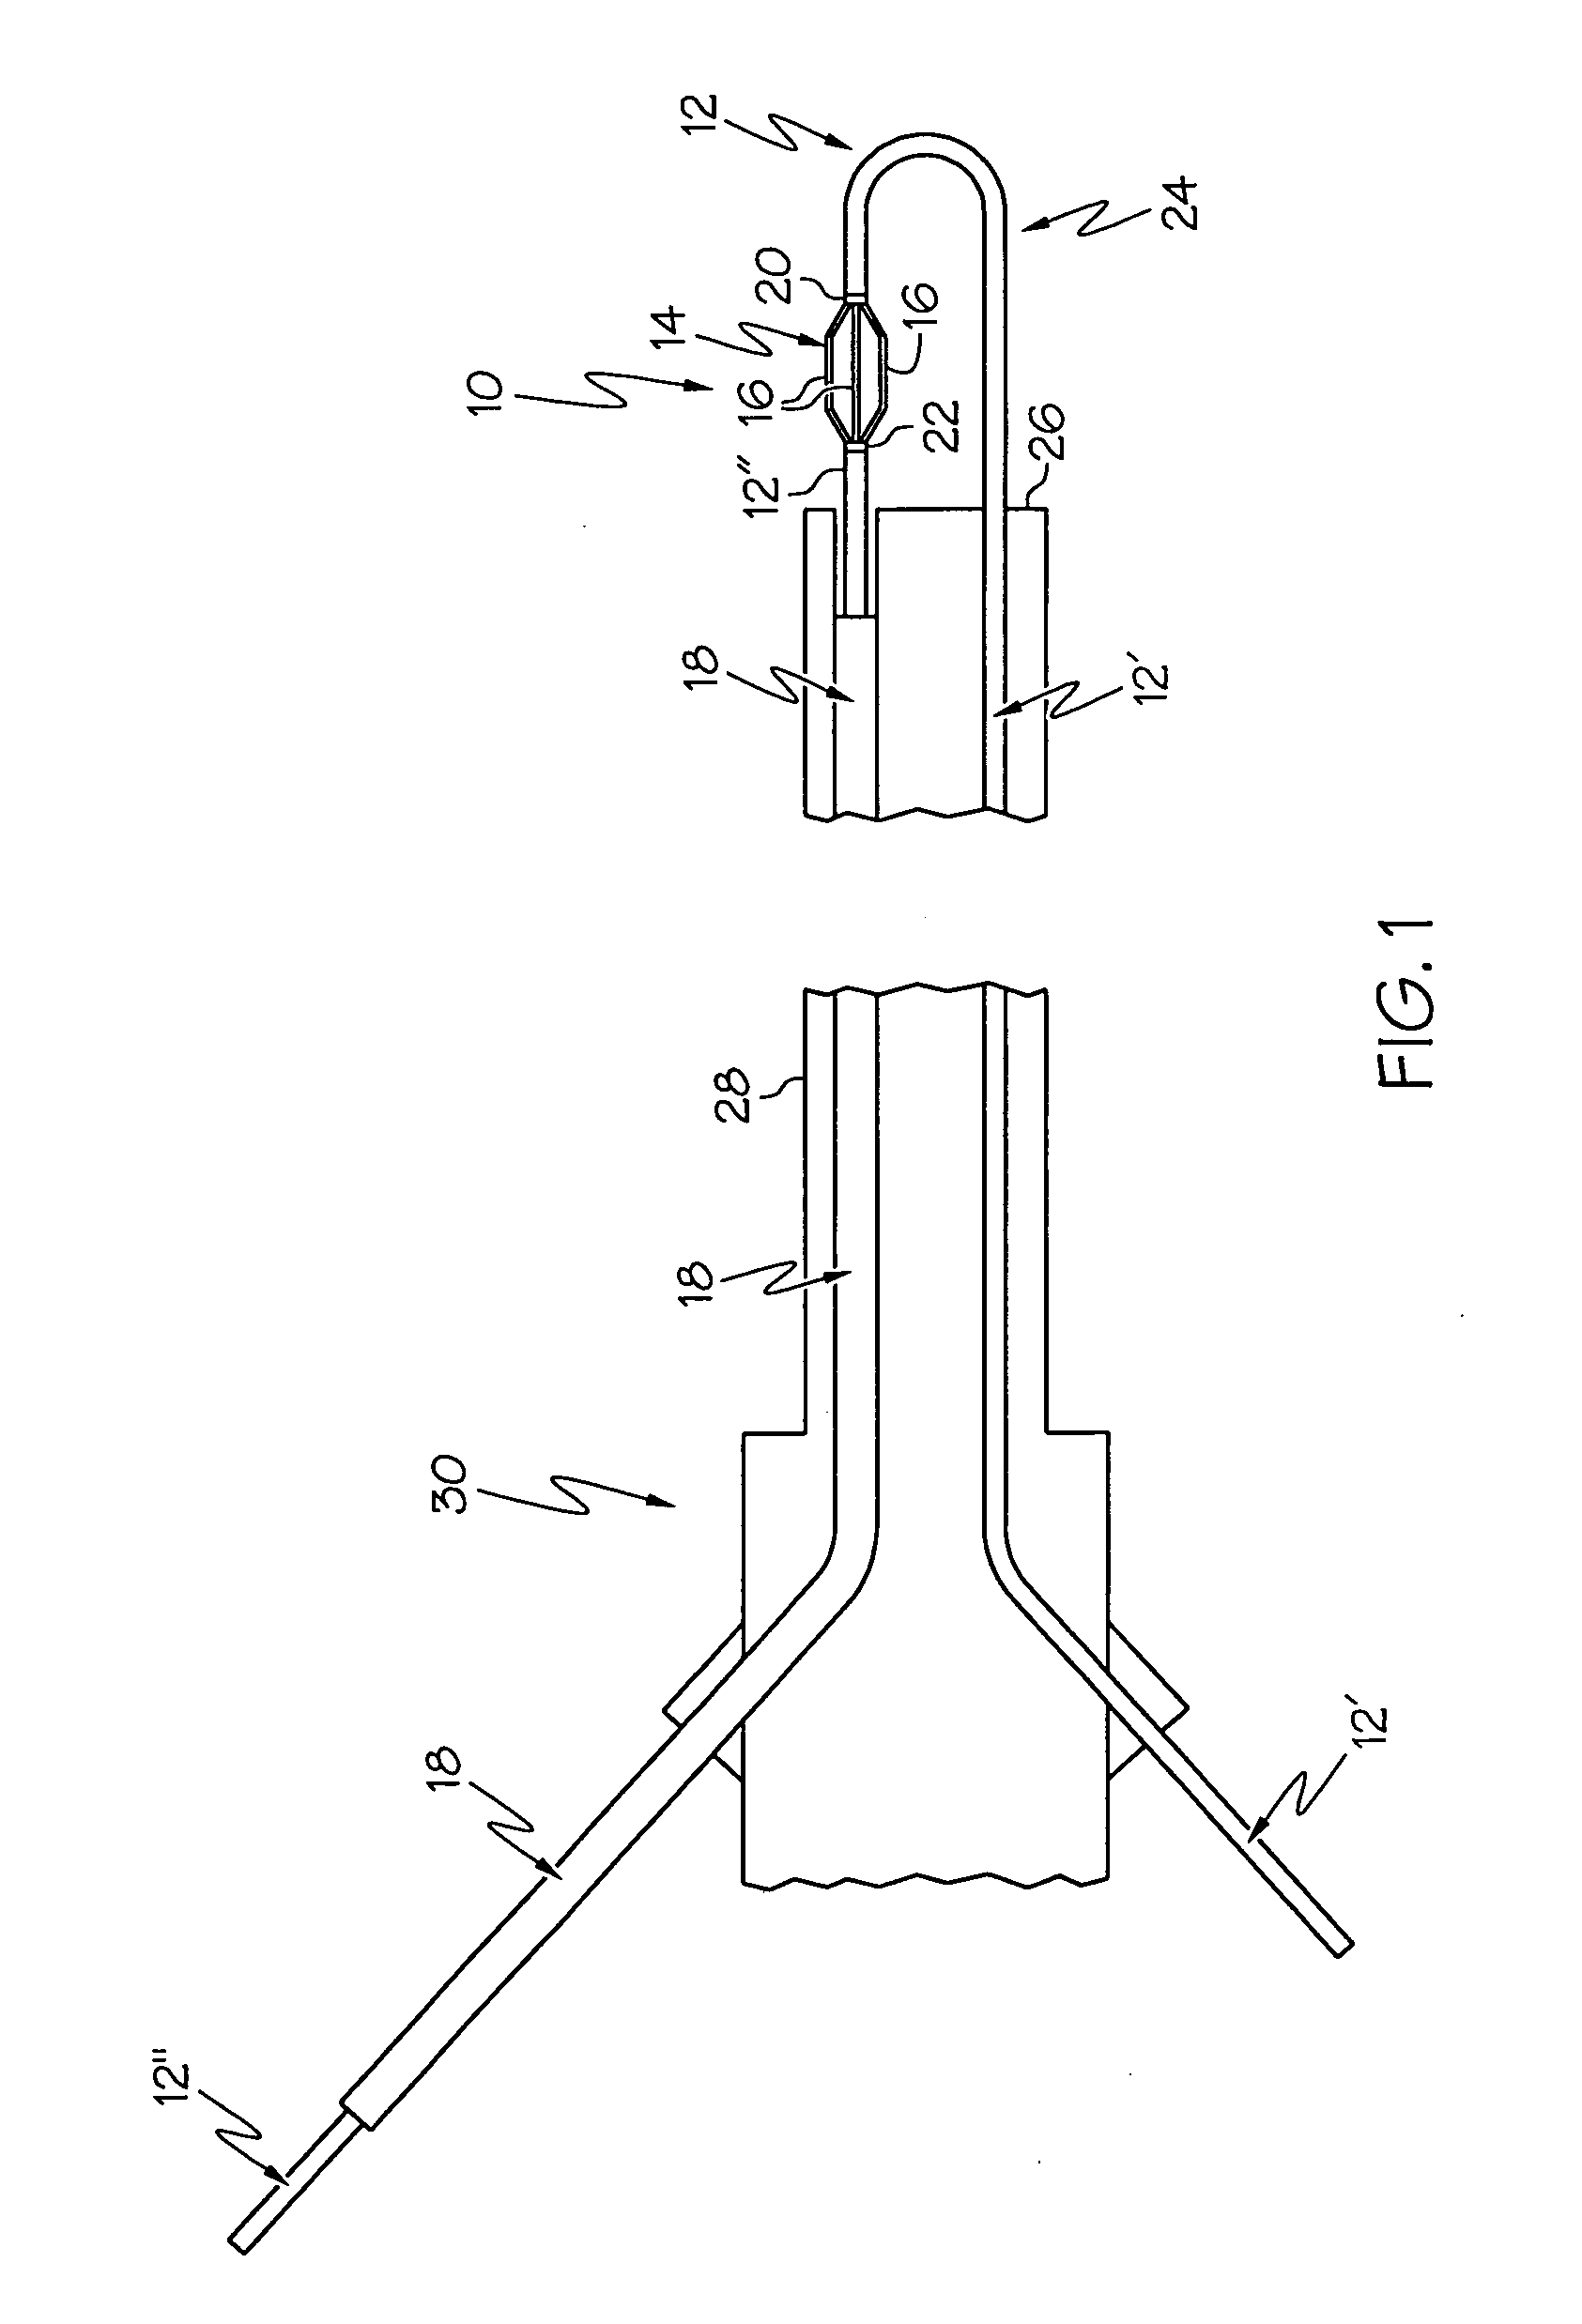 Guidewire structure including a medical guidewire